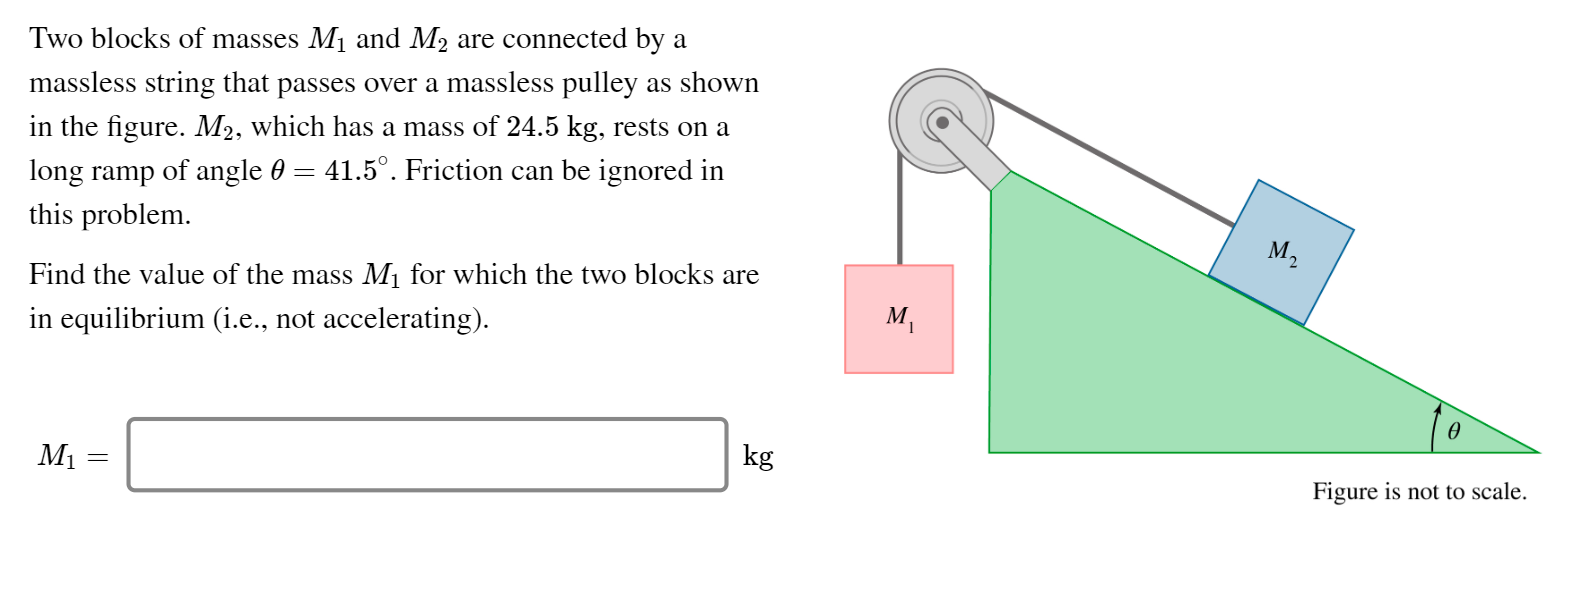 Two blocks of masses M1 and M2 are connected by a
massless string that passes over a massless pulley as shown
in the figure. M2, which has a mass of 24.5 kg, rests on a
long ramp of angle 0 = 41.5°. Friction can be ignored in
this problem.
M2
Find the value of the mass M1 for which the two blocks are
in equilibrium (i.e., not accelerating).
м,
ө
M1
kg
Figure is not to scale.
